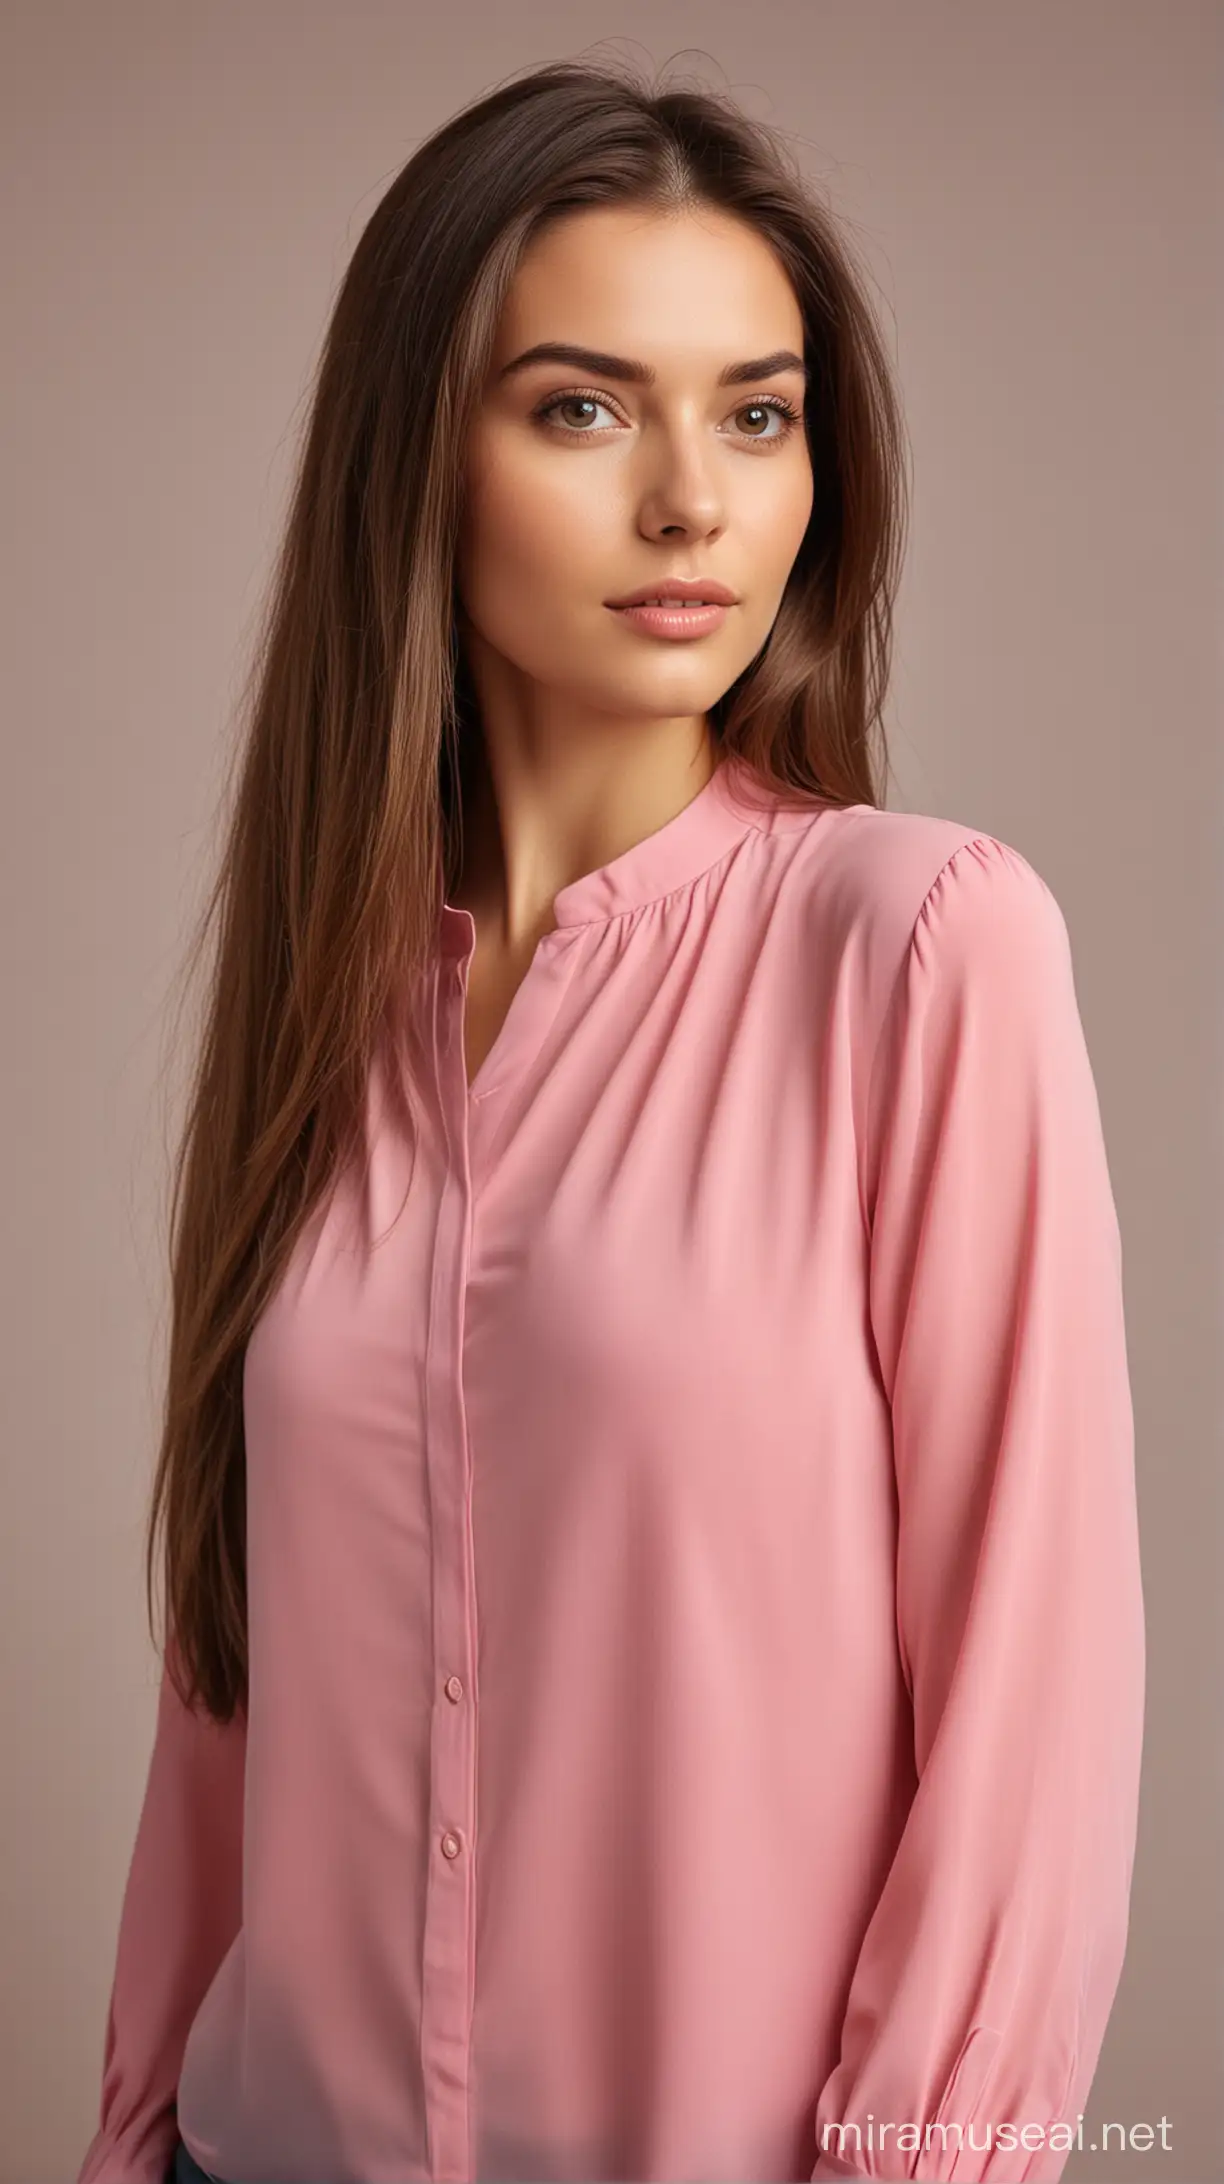 Elegant Woman with Long Soft Brown Hair in Pink Blouse